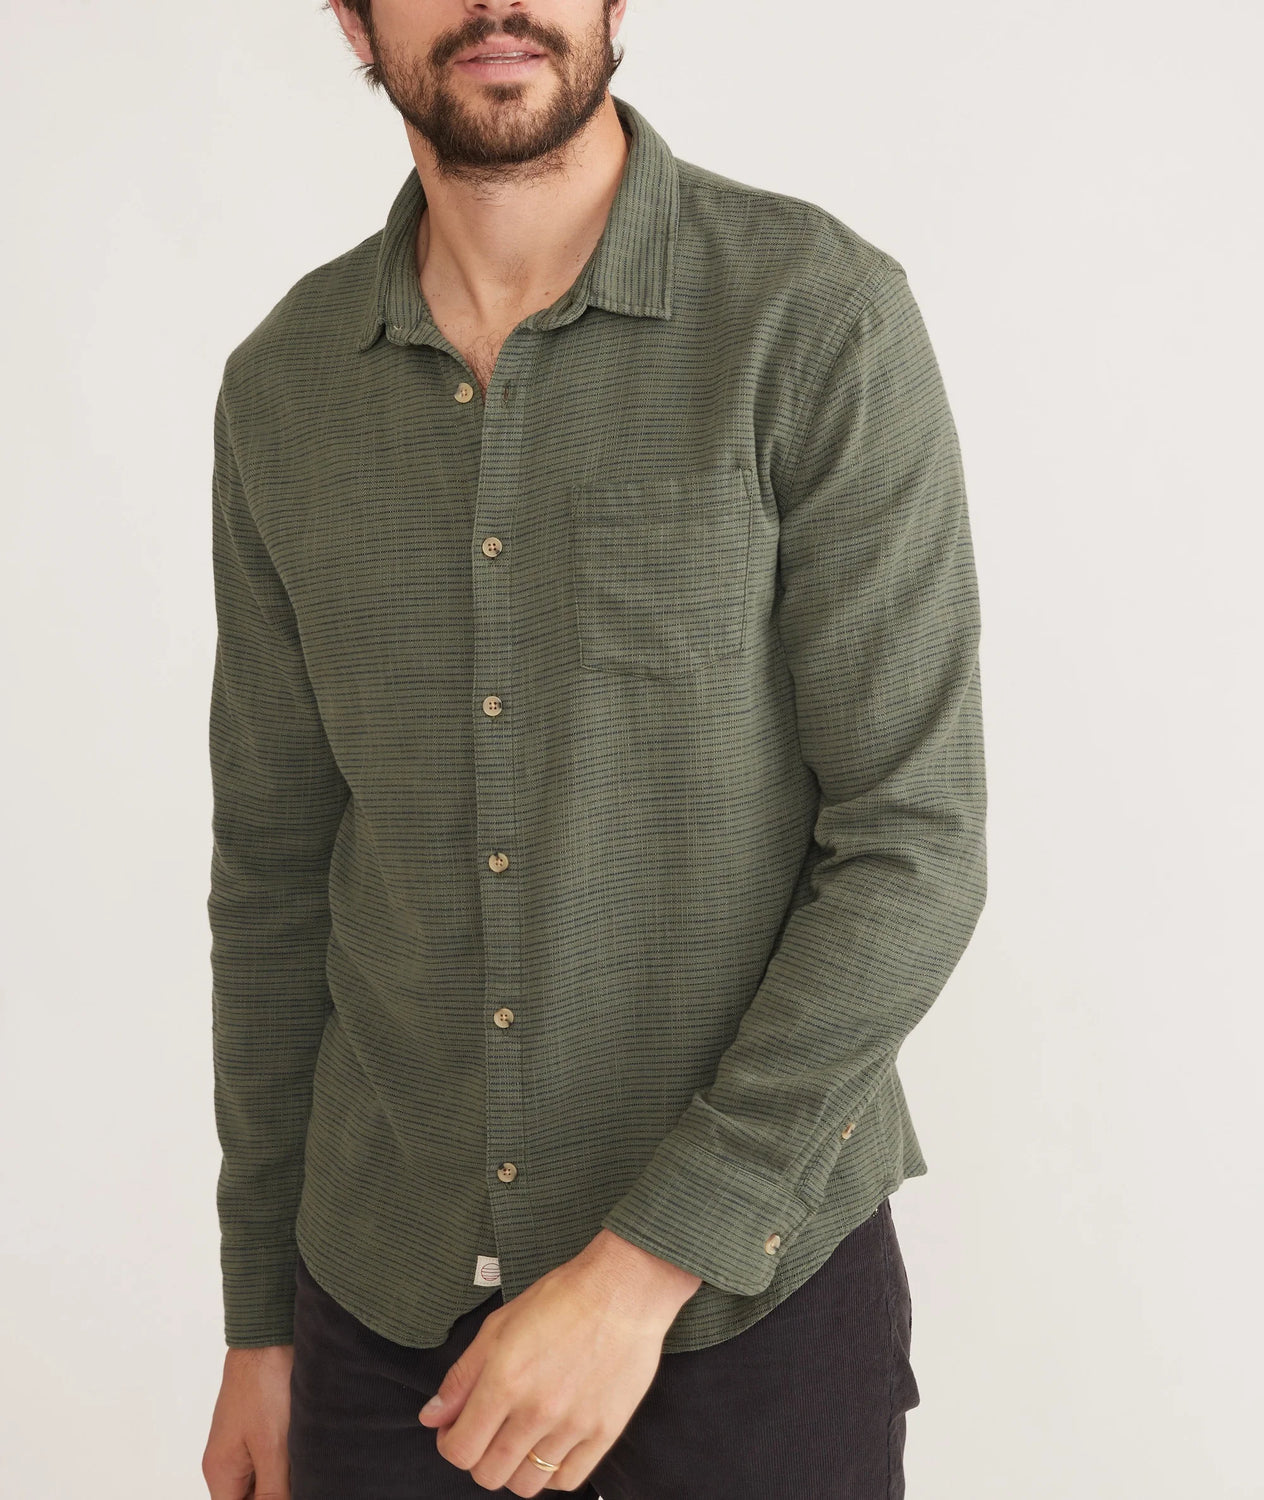 Marine Layer Long Sleeve Classic Stretch Selvage Shirt in Olive Stripe